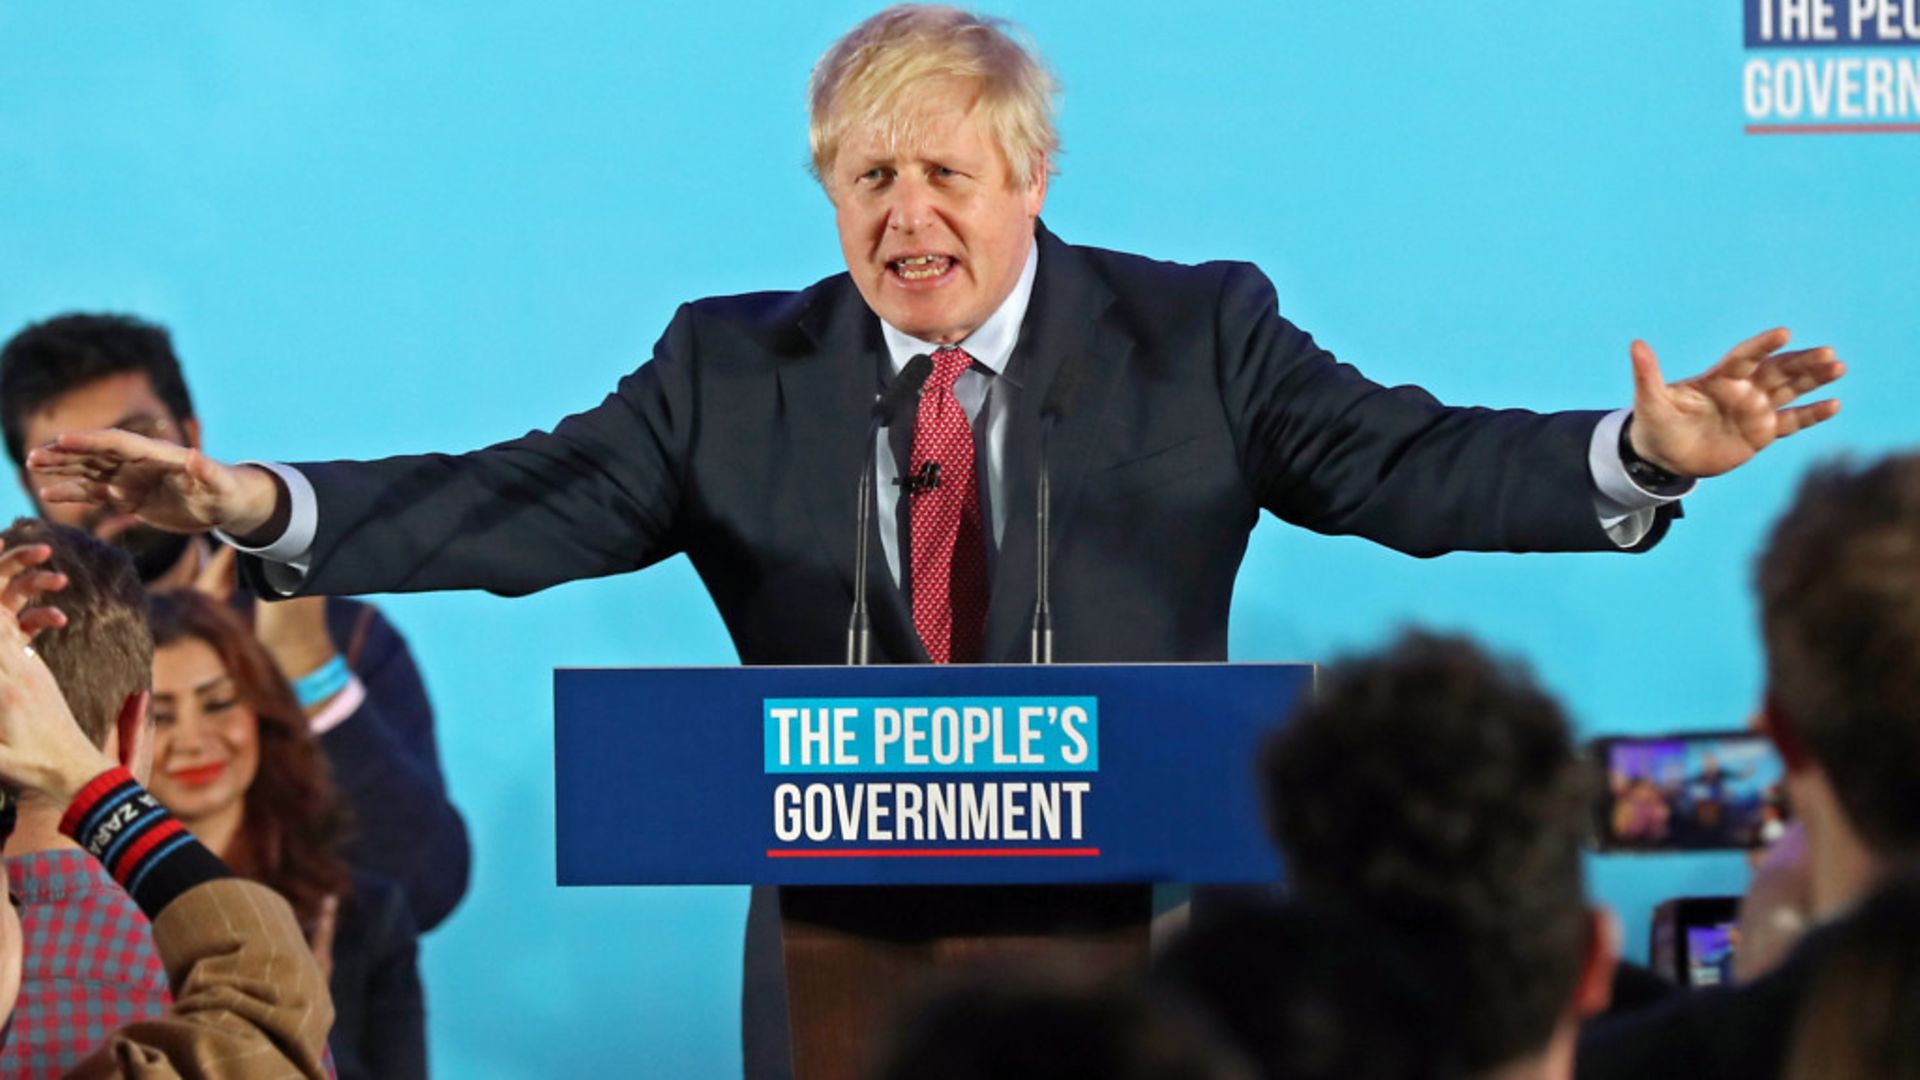 Boris Johnson at a rally with party supporters after the Conservative Party was returned to power in the General Election with an increased majority - Credit: PA